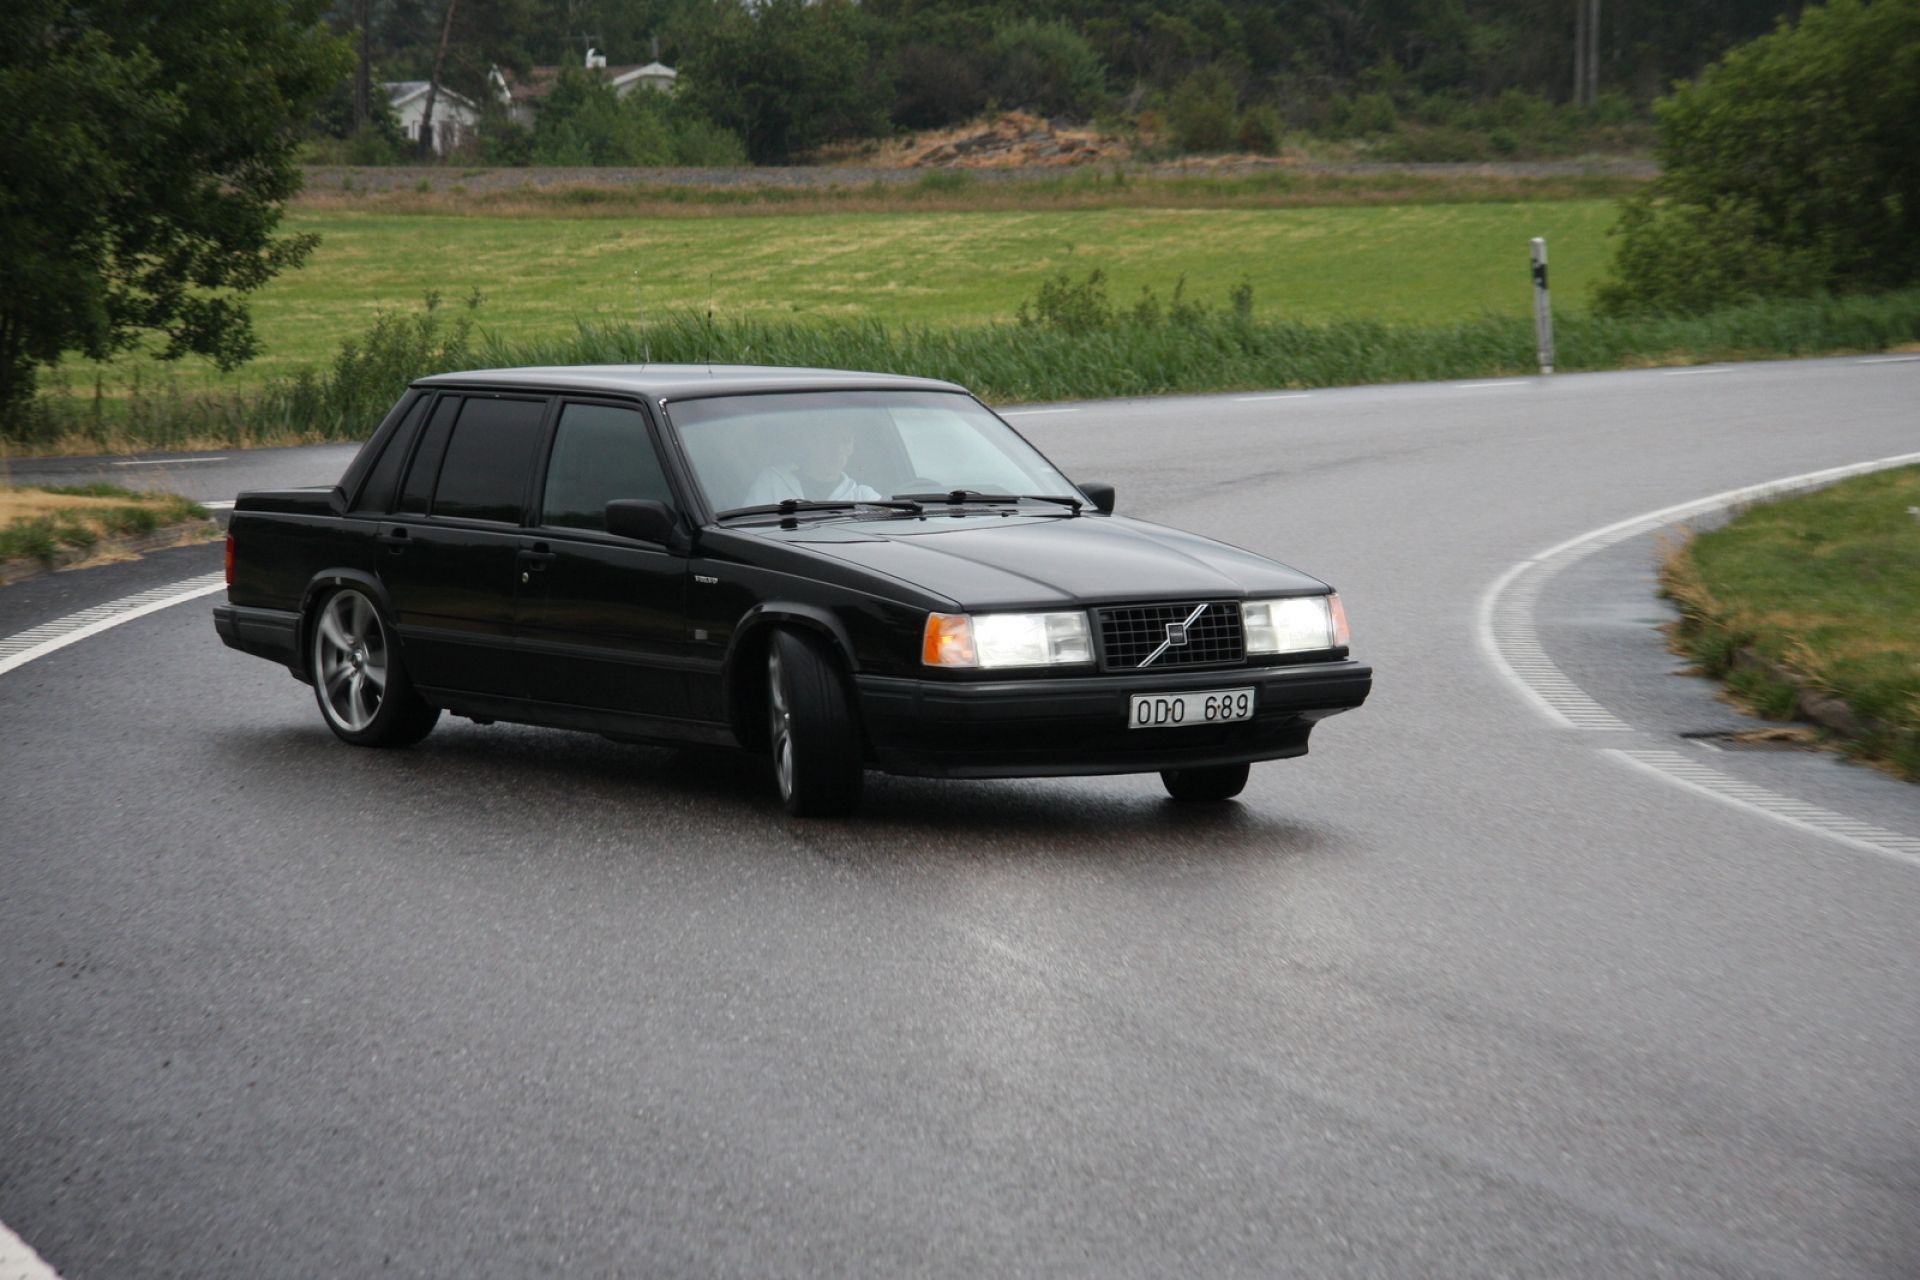 Black Volvo 740 Turbo while drifting on the wet road